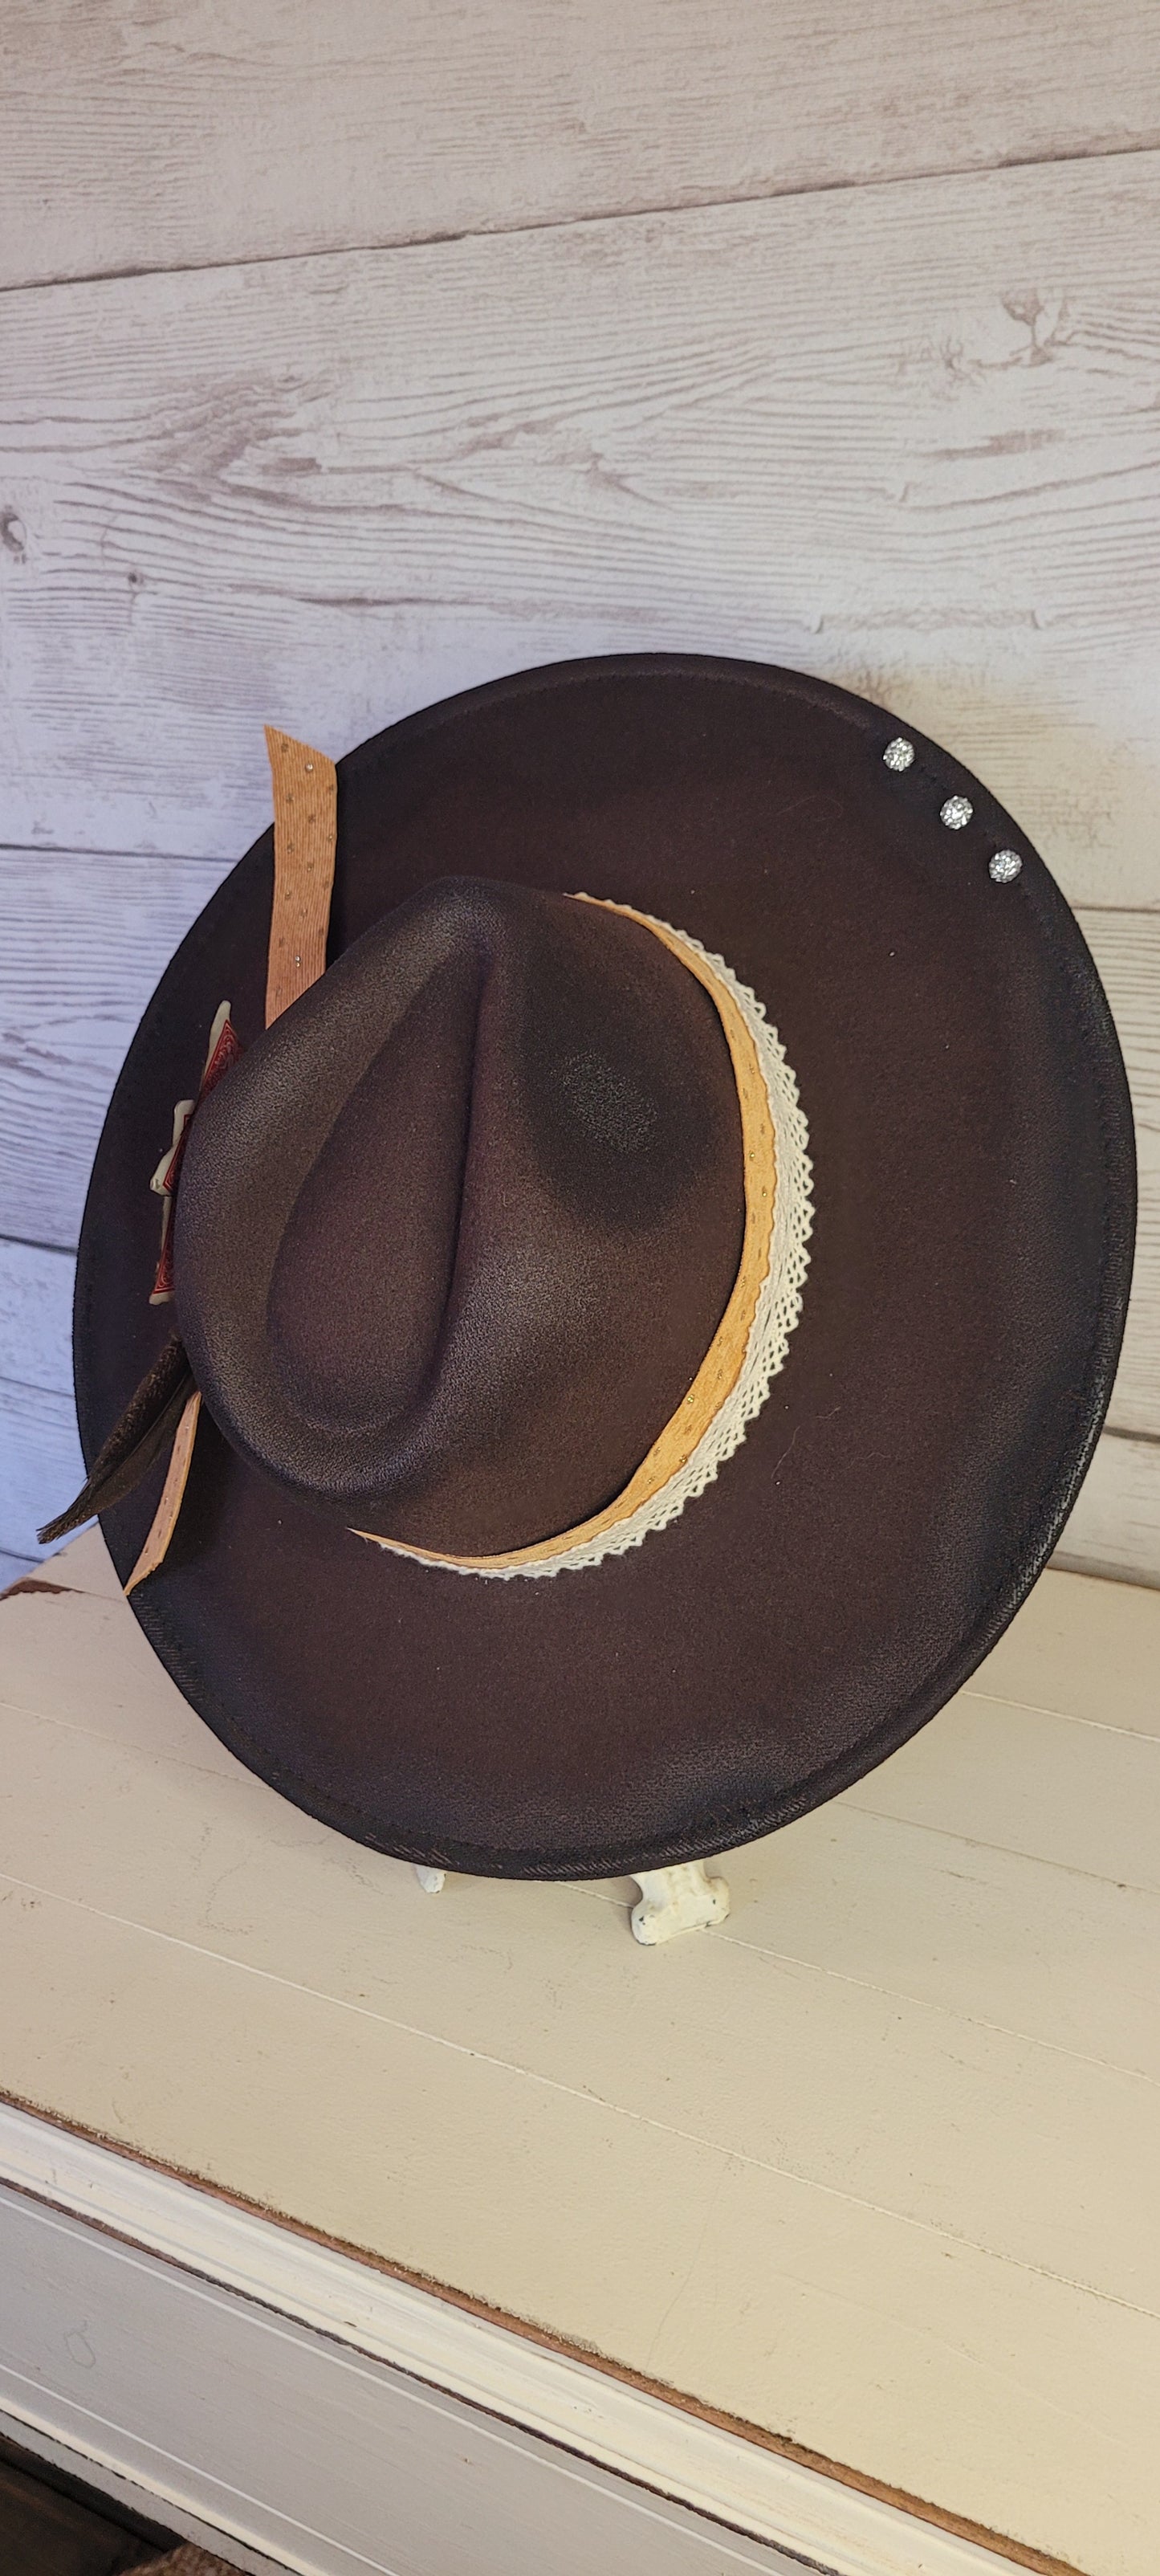 Features natural lace ribbon, corduroy ribbon, feather, playing cards, pistol brooch, & rhinestone beads Felt hat Flat brim 65% polyester and 35% cotton Ribbon drawstring for hat size adjustment Head Circumference: 24" Crown Height: 5" Brim Length: 15.75" Brim Width: 14.5" Branded & numbered inside crown Custom designed by Kayla